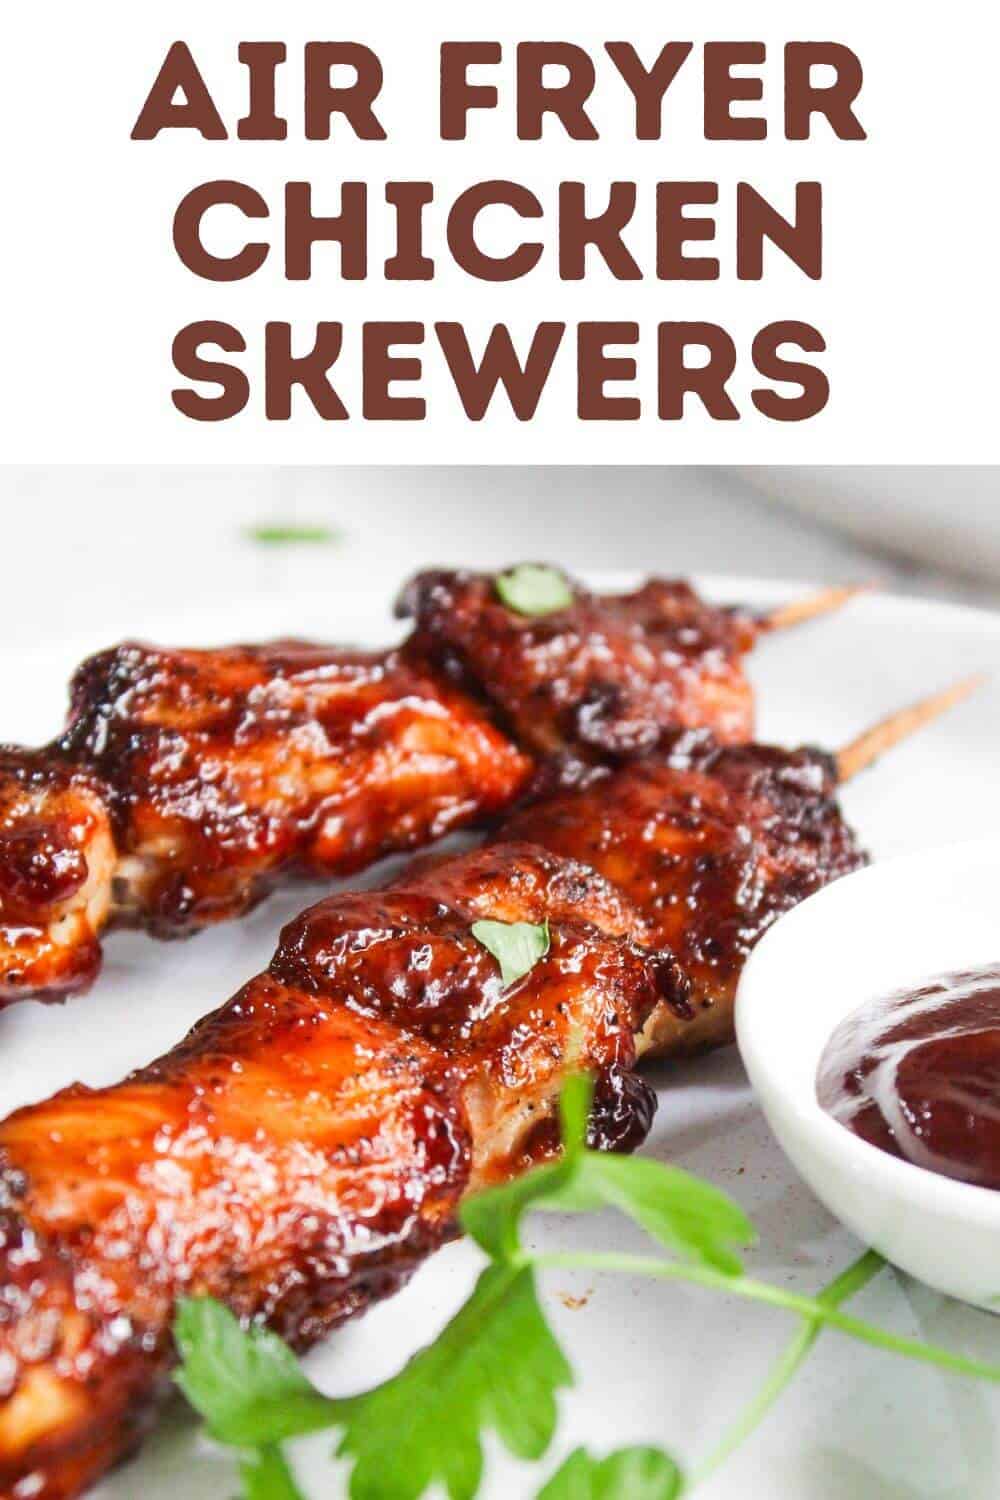 Chicken skewers on a plate.